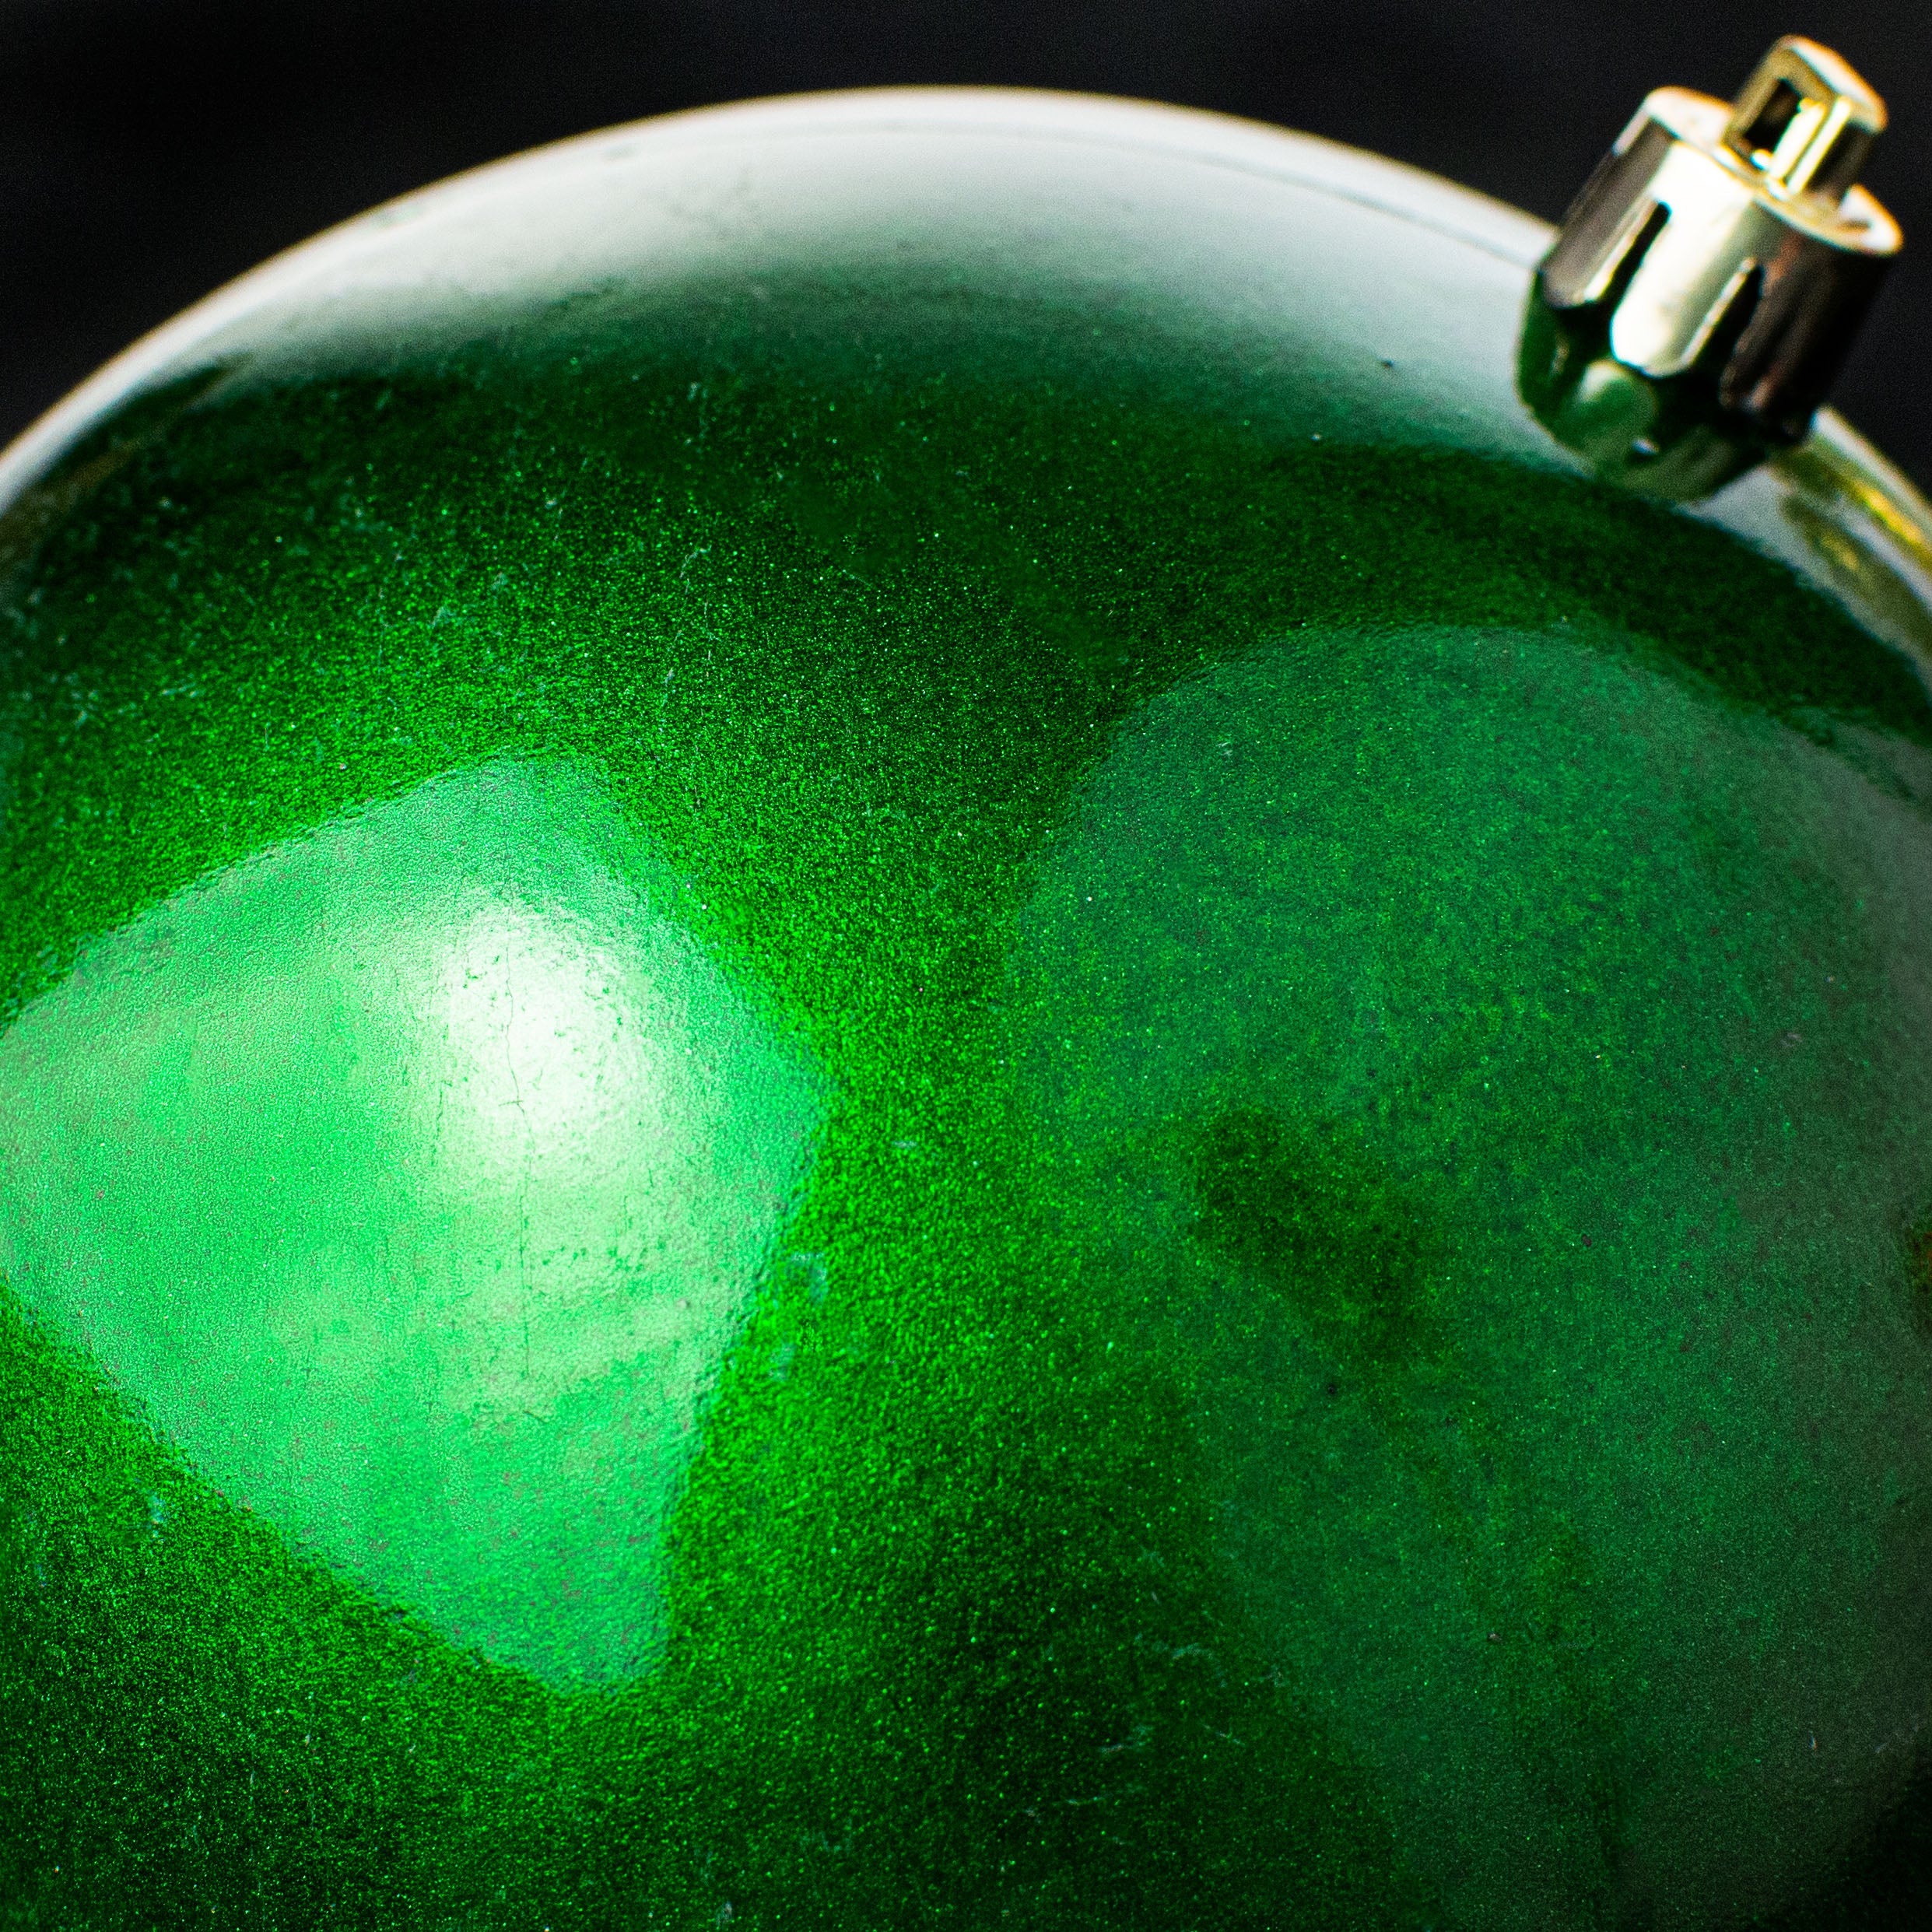 120MM Plastic Ball Ornaments: Candy Apple Green (Set of 2)